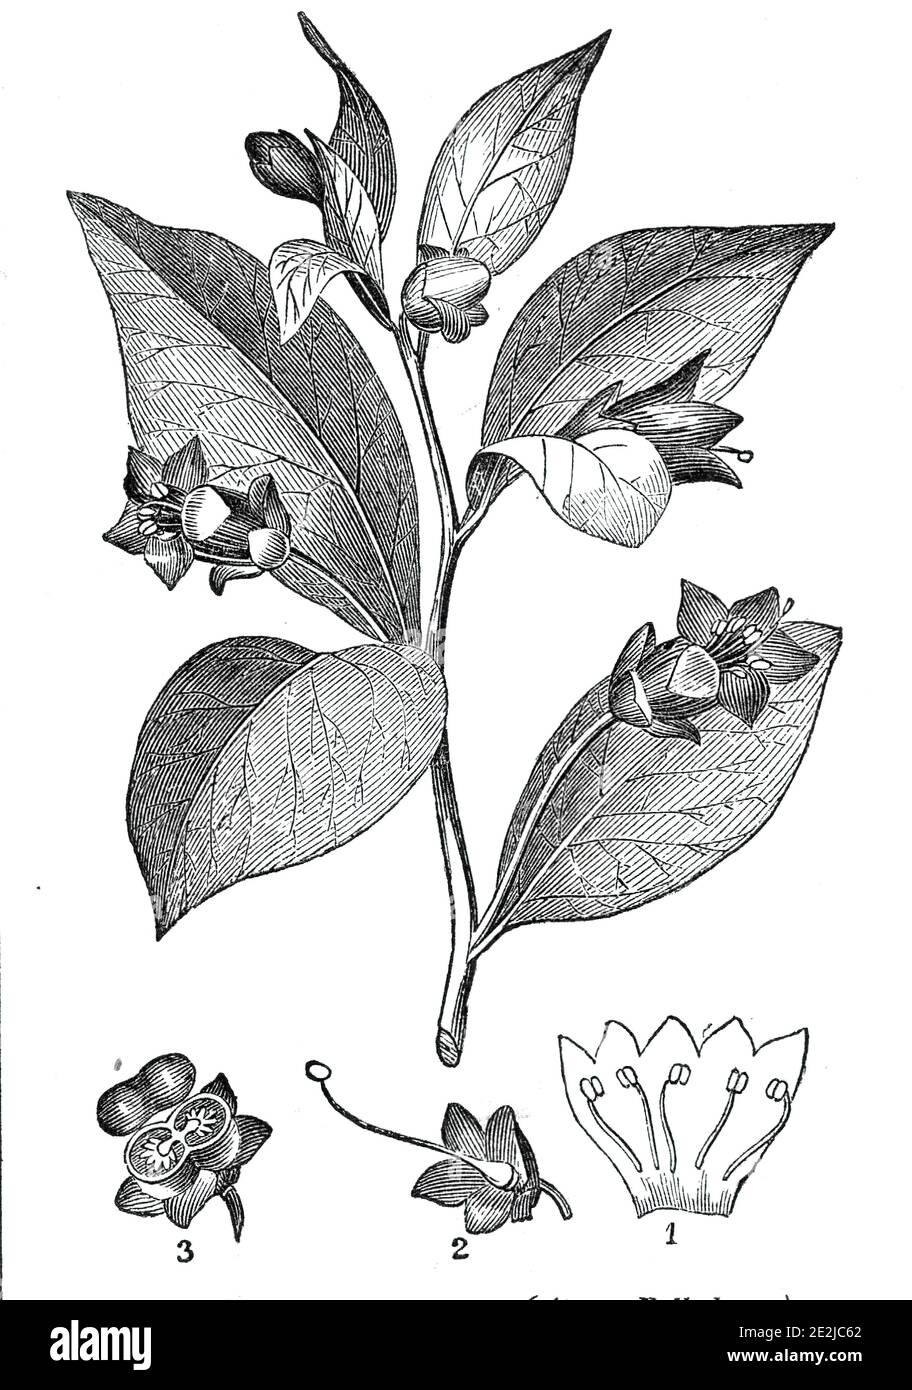 The Deadly Nightshade - (Atropa belladonna), 1844. 'The plant Atropa Belladonna, Deadly Nightshade, or dwale, is found not unfrequently in hedges and thickets in this country. The whole is of a lightish green colour, except the flowers, which are of a large and dingy-brownish purple; and the berries, which are of the rich deep black ot black cherries. The odour of the whole plant is nauseous and oppressive, as if to warn us of its venomous nature: the berries, from their resemblance to cherries, have often been eaten by children, with fatal consequences. The active property of the leaves and r Stock Photo